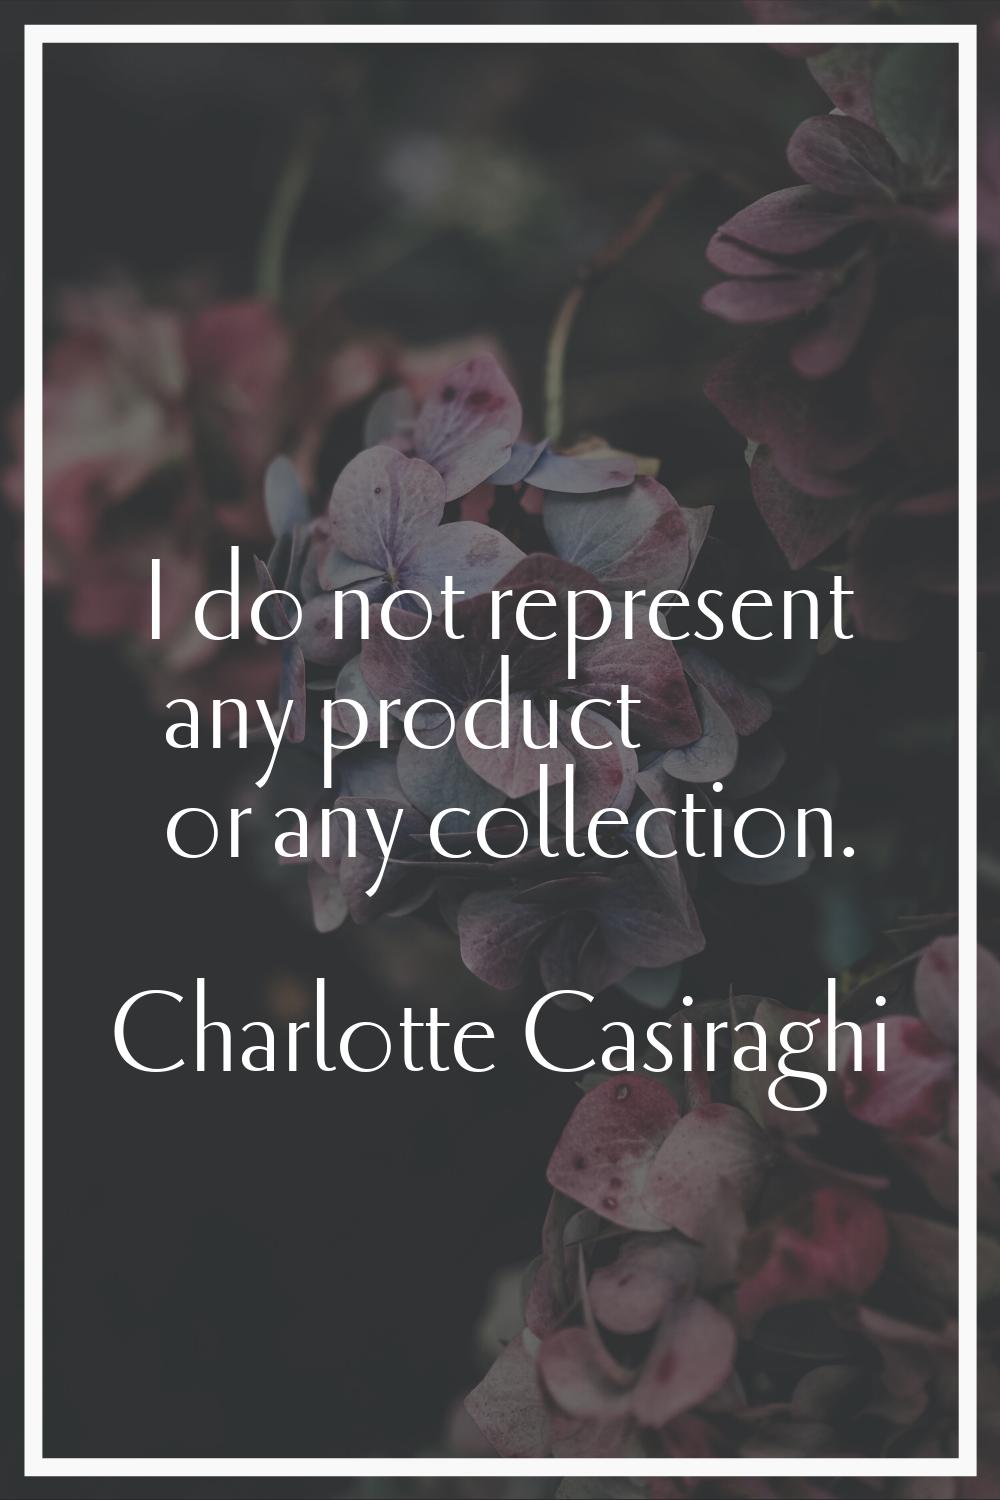 I do not represent any product or any collection.